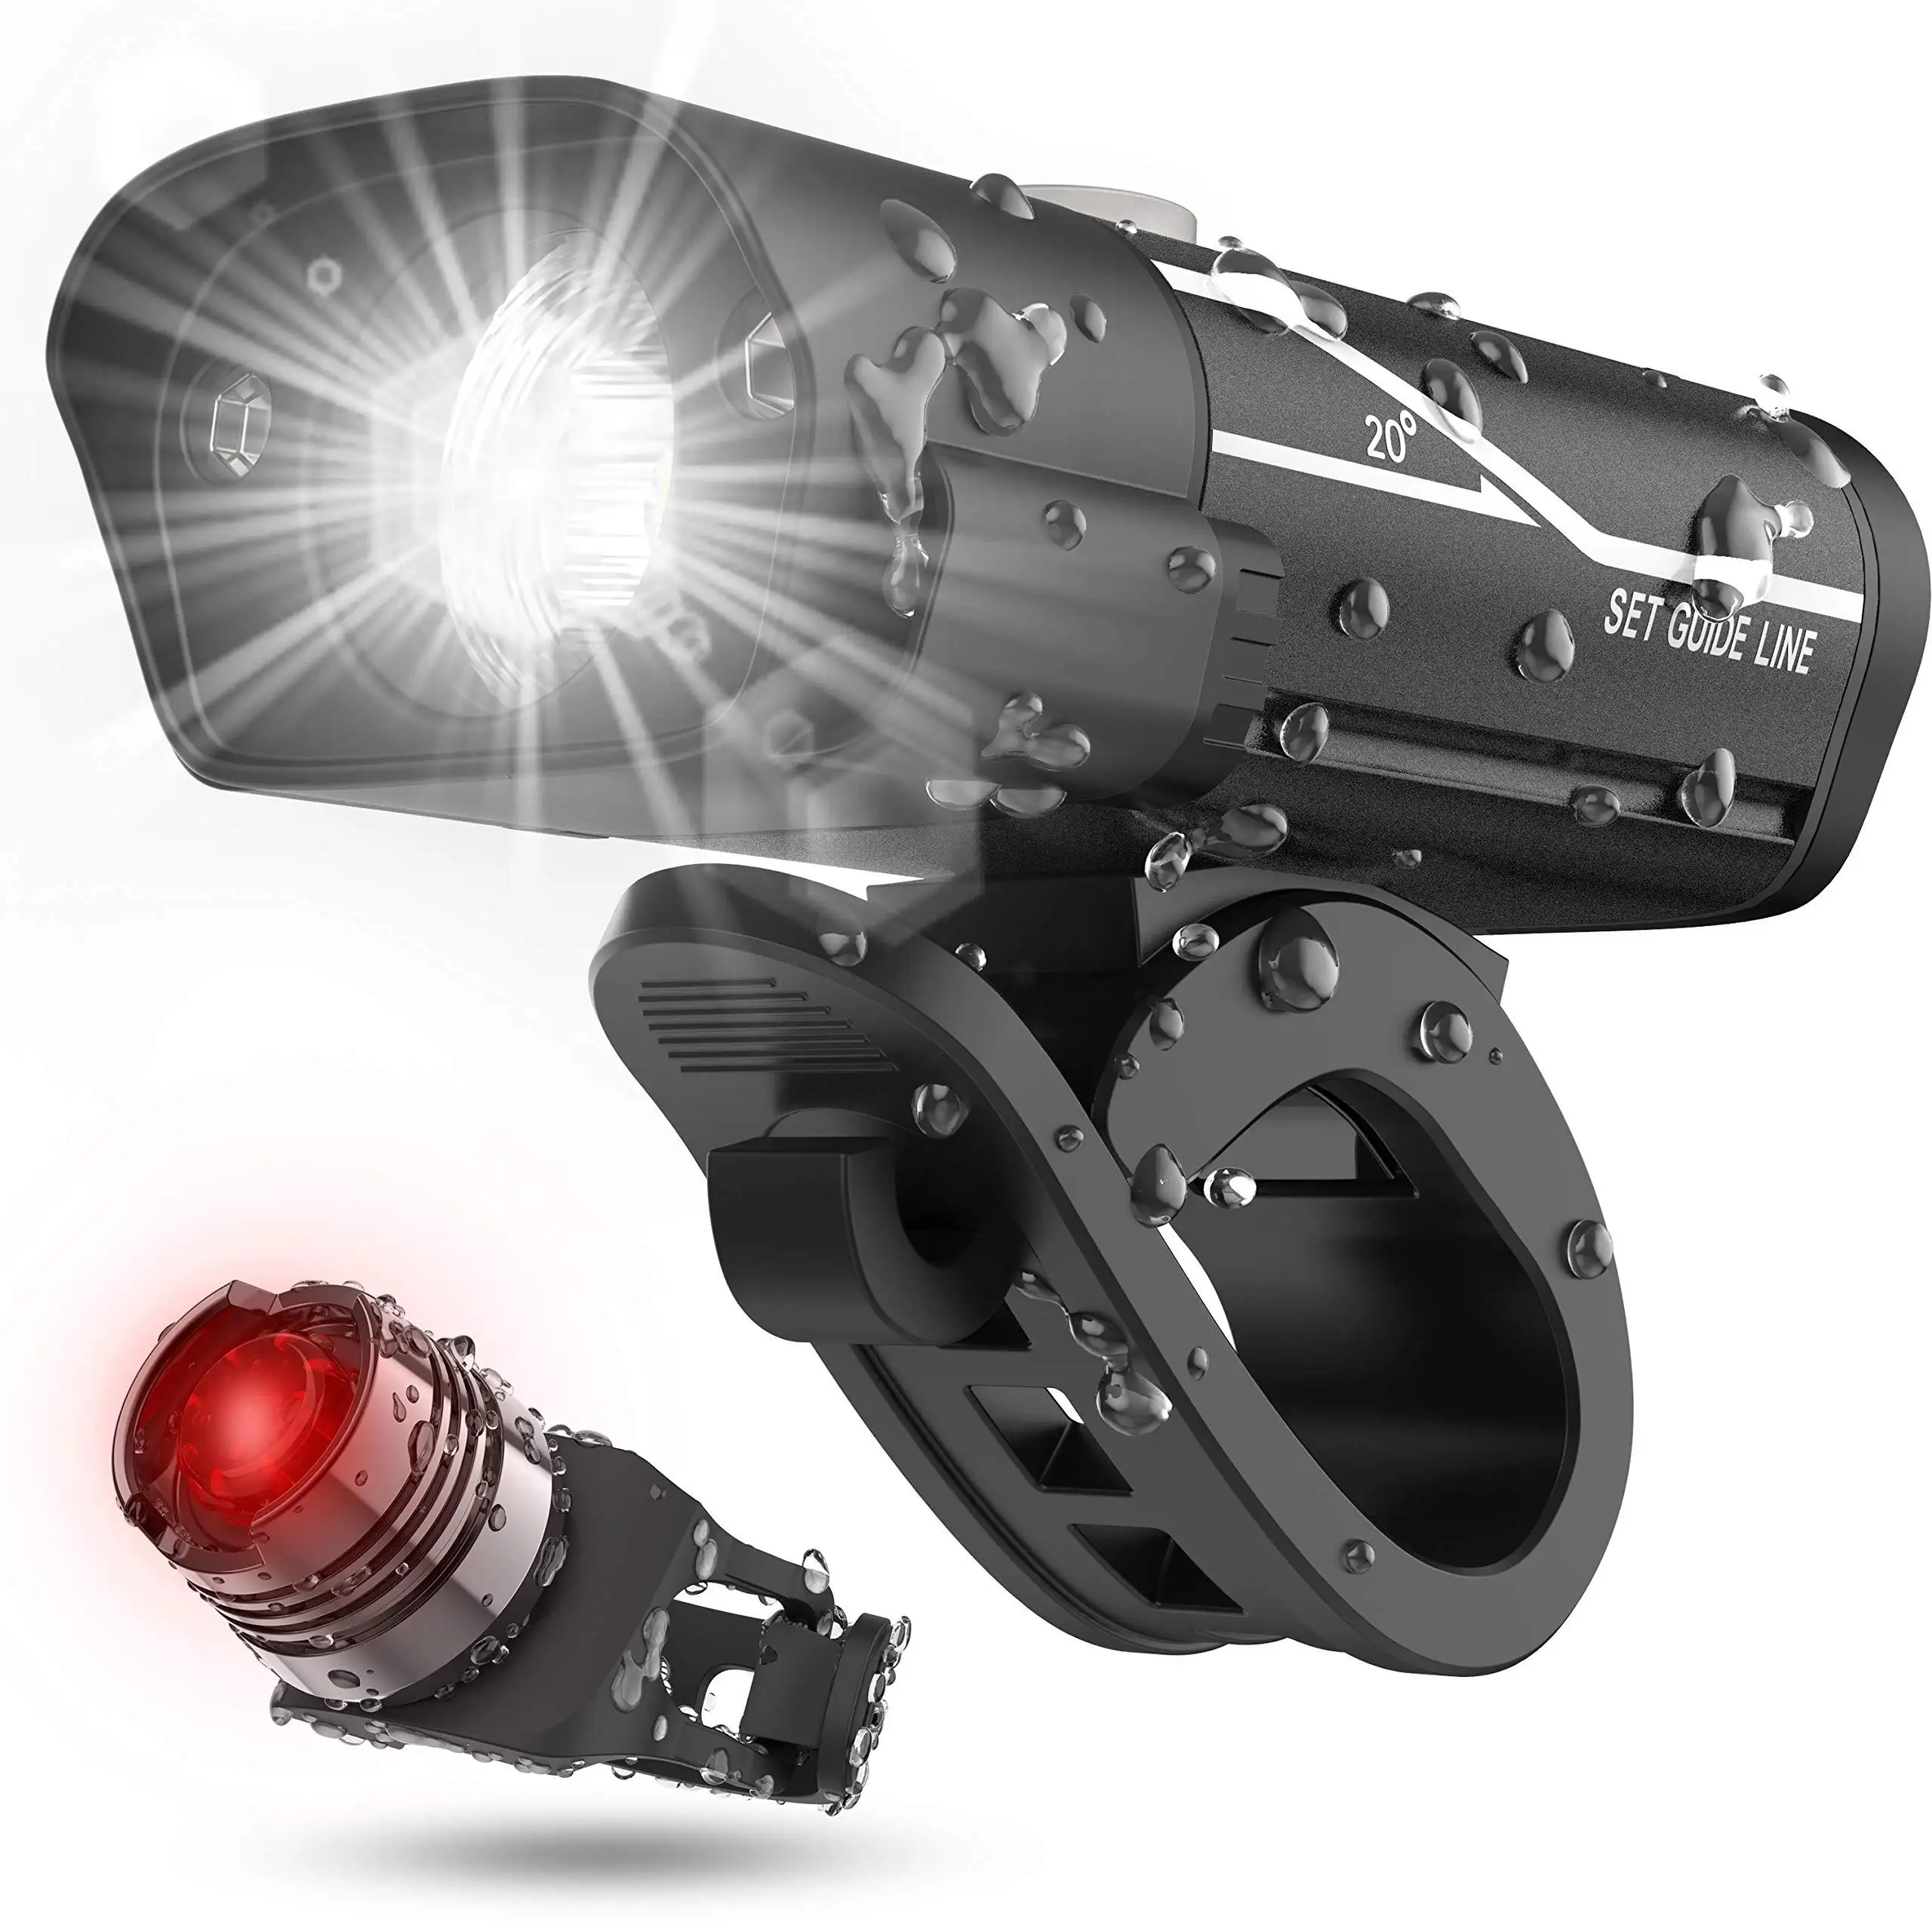 USB rechargeable IPX4 waterproof Bicycle LED Headlight and Back bike Light Set with 5 lighting options